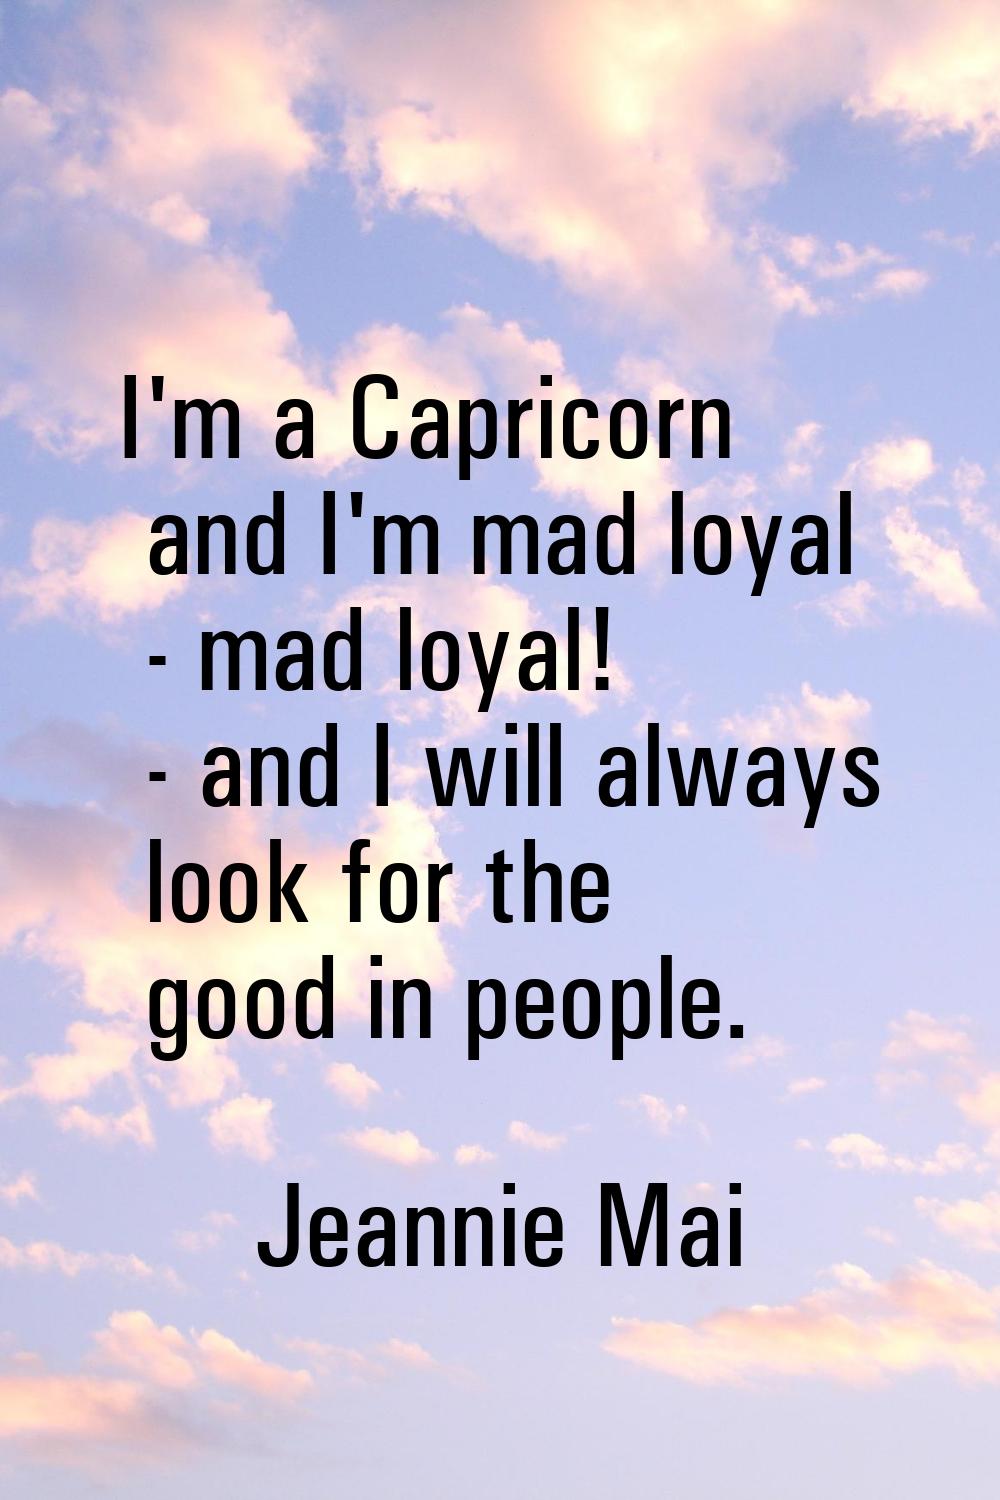 I'm a Capricorn and I'm mad loyal - mad loyal! - and I will always look for the good in people.